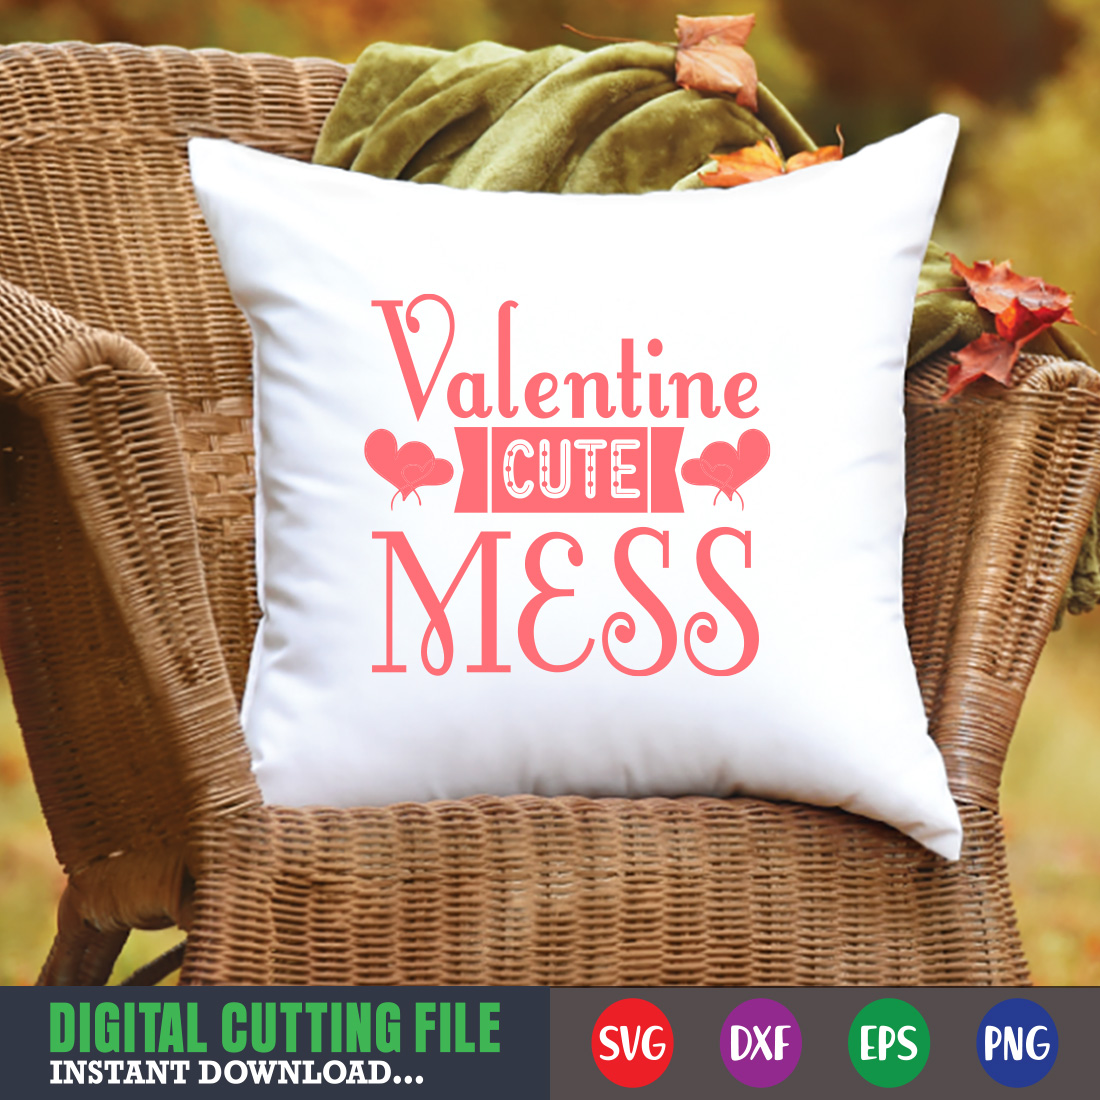 Pillow mockup with Valentine Cute Mess T-shirt.